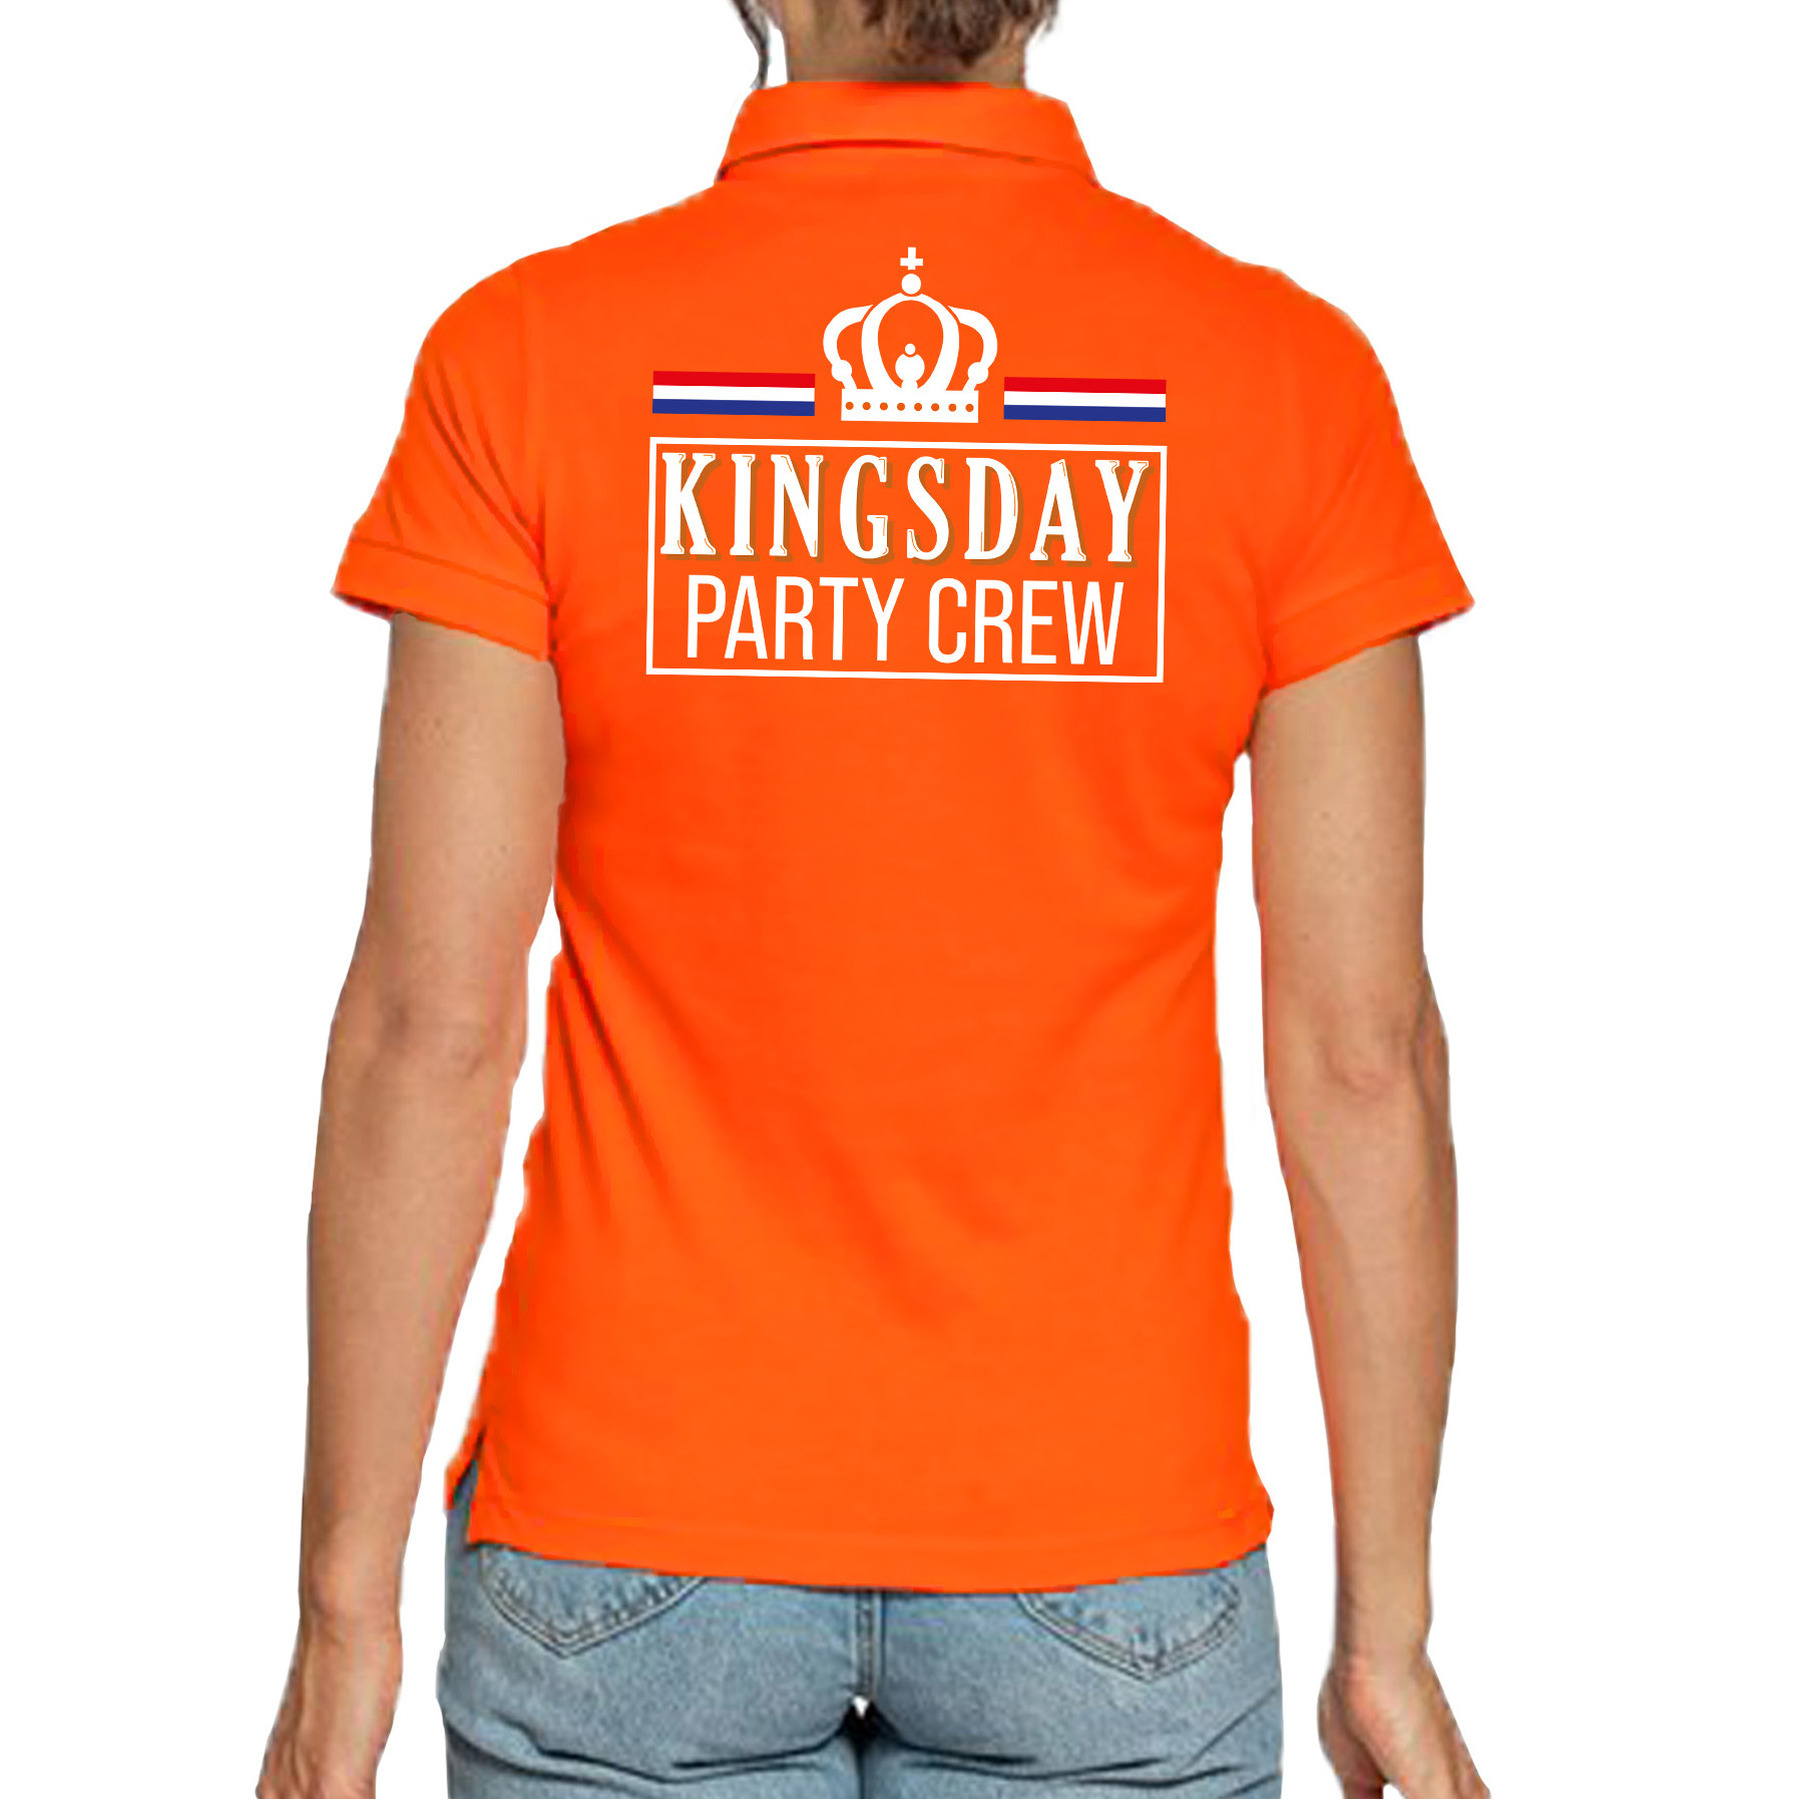 Kingsday party crew polo shirt oranje voor dames Koningsdag polo shirts